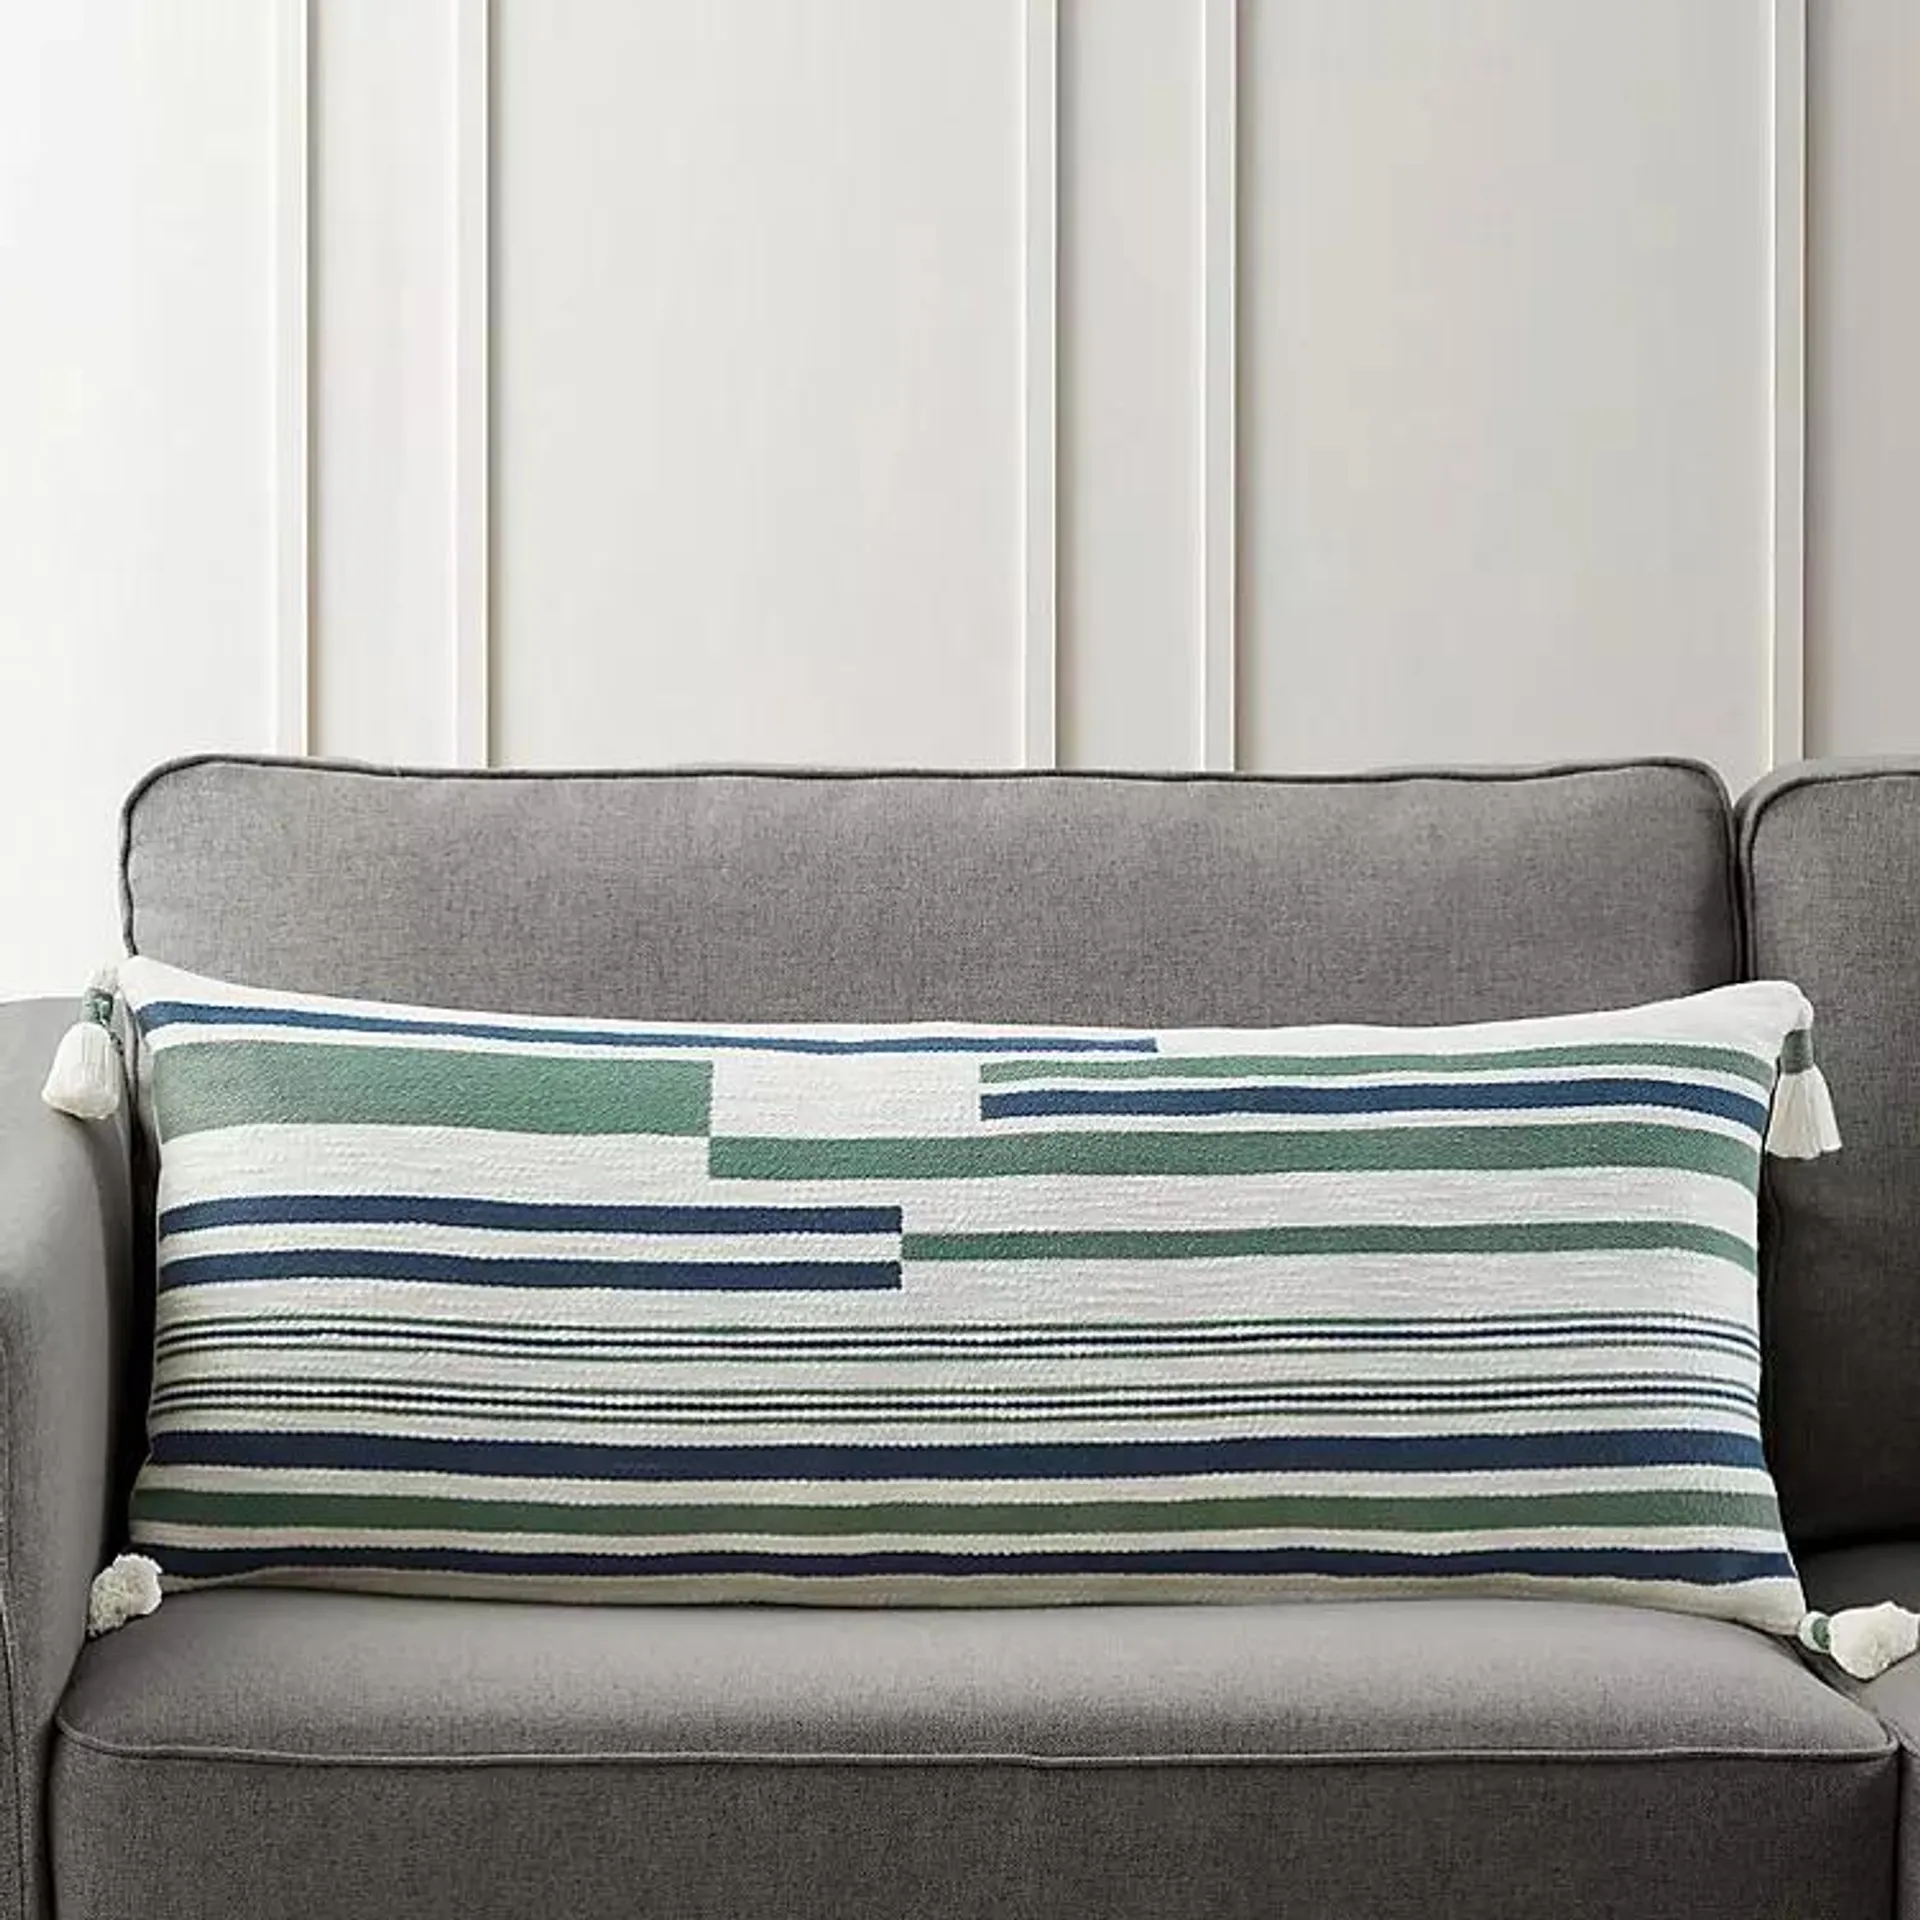 Member’s Mark Woven Decorative Pillows (Assorted Styles and Sizes)